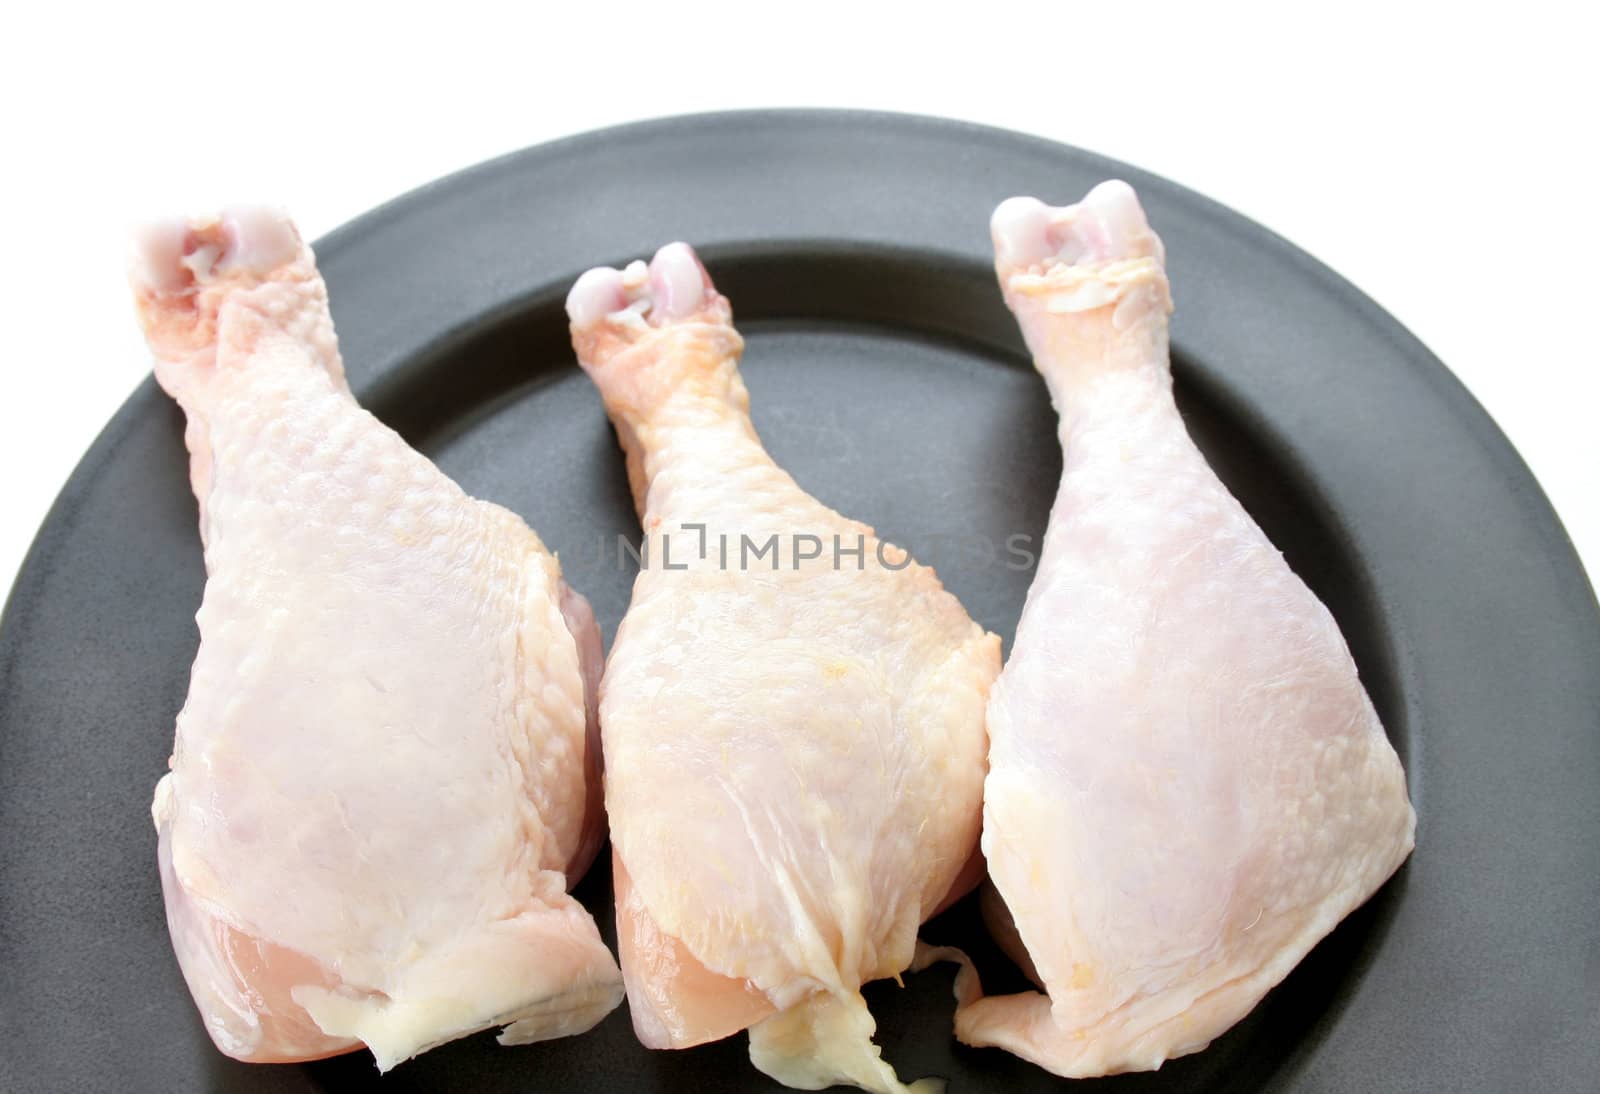 3 raw chicken legs on a plate that is isolated on white.